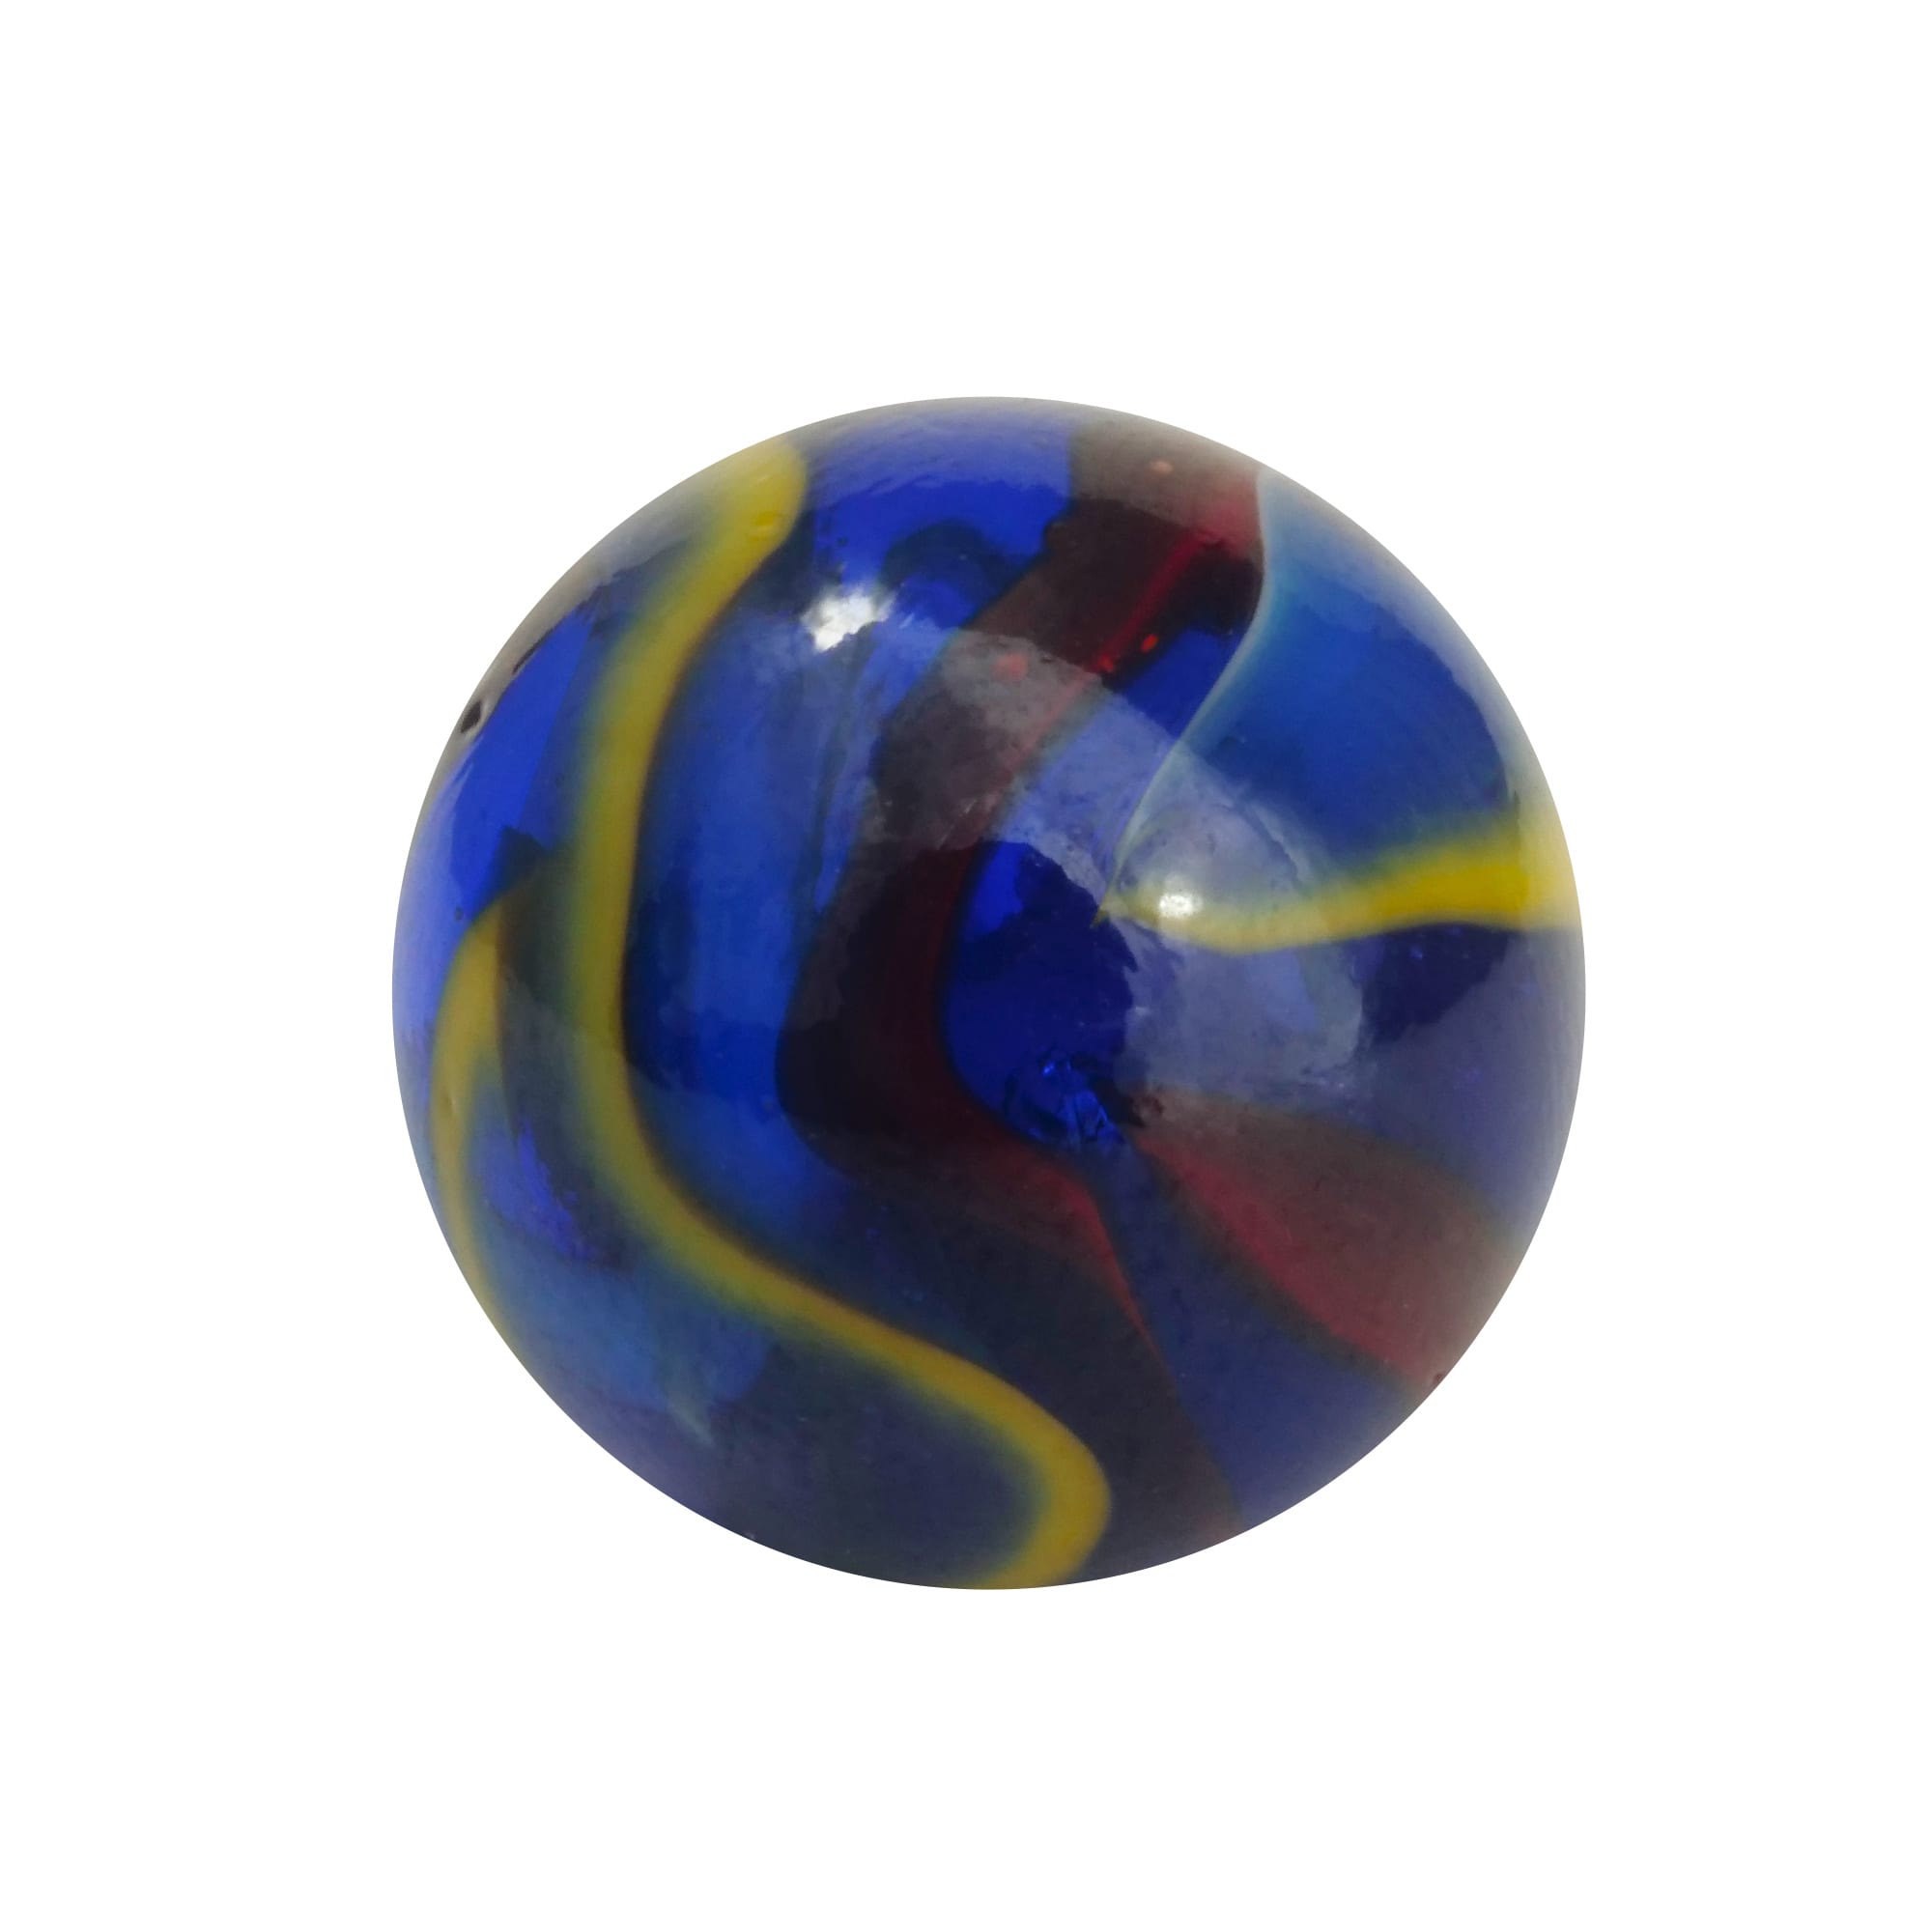 2 BOULDER 1 3/8 INCH 35MM MICHAELANGELO BY VACOR MARBLES FREE SHIPPING 